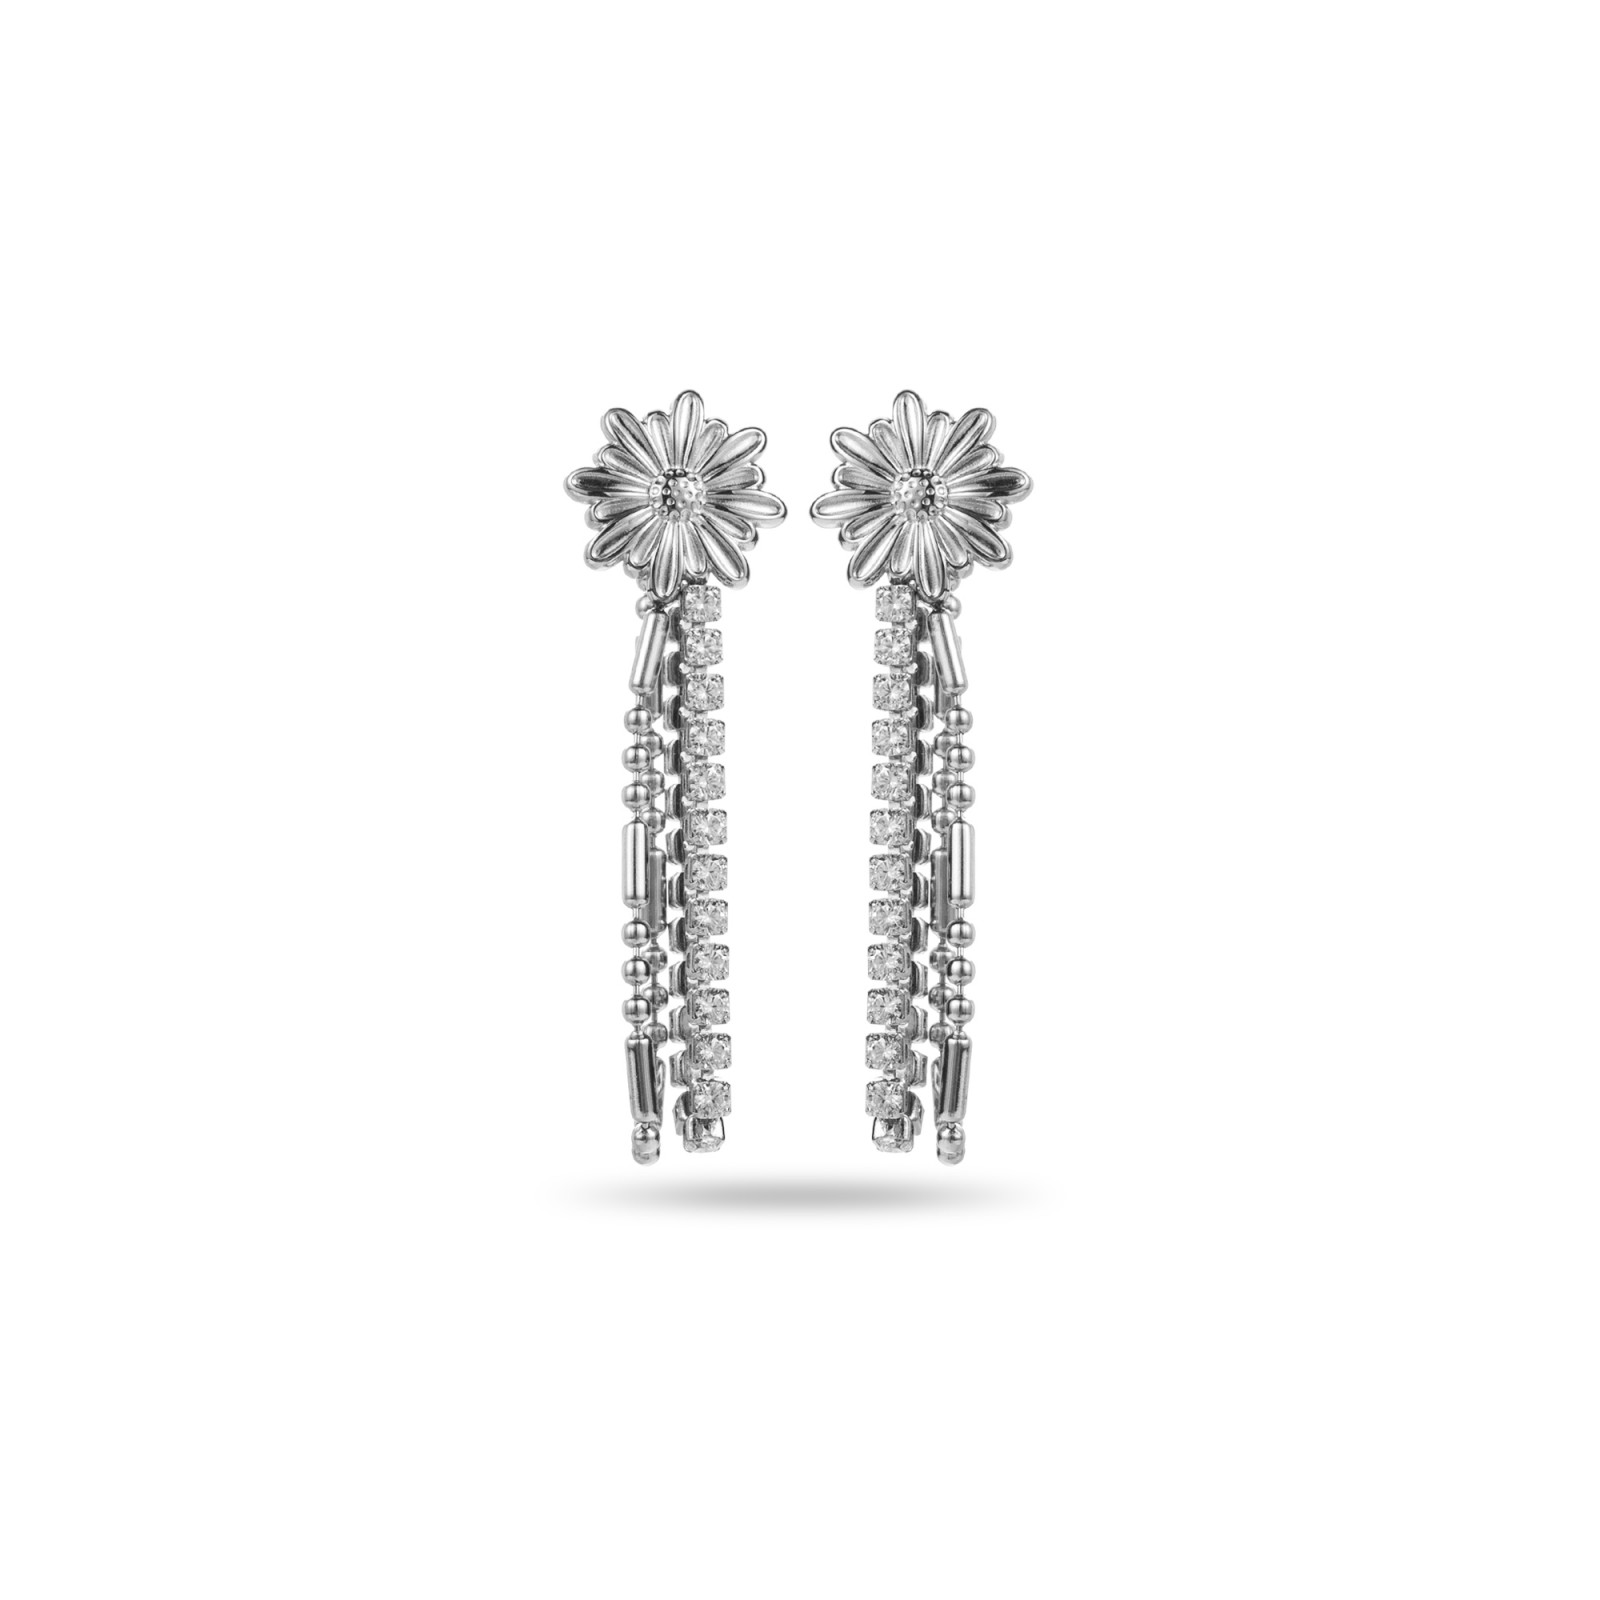 Daisy Flower with Chains Drops Earrings Coating:Silver